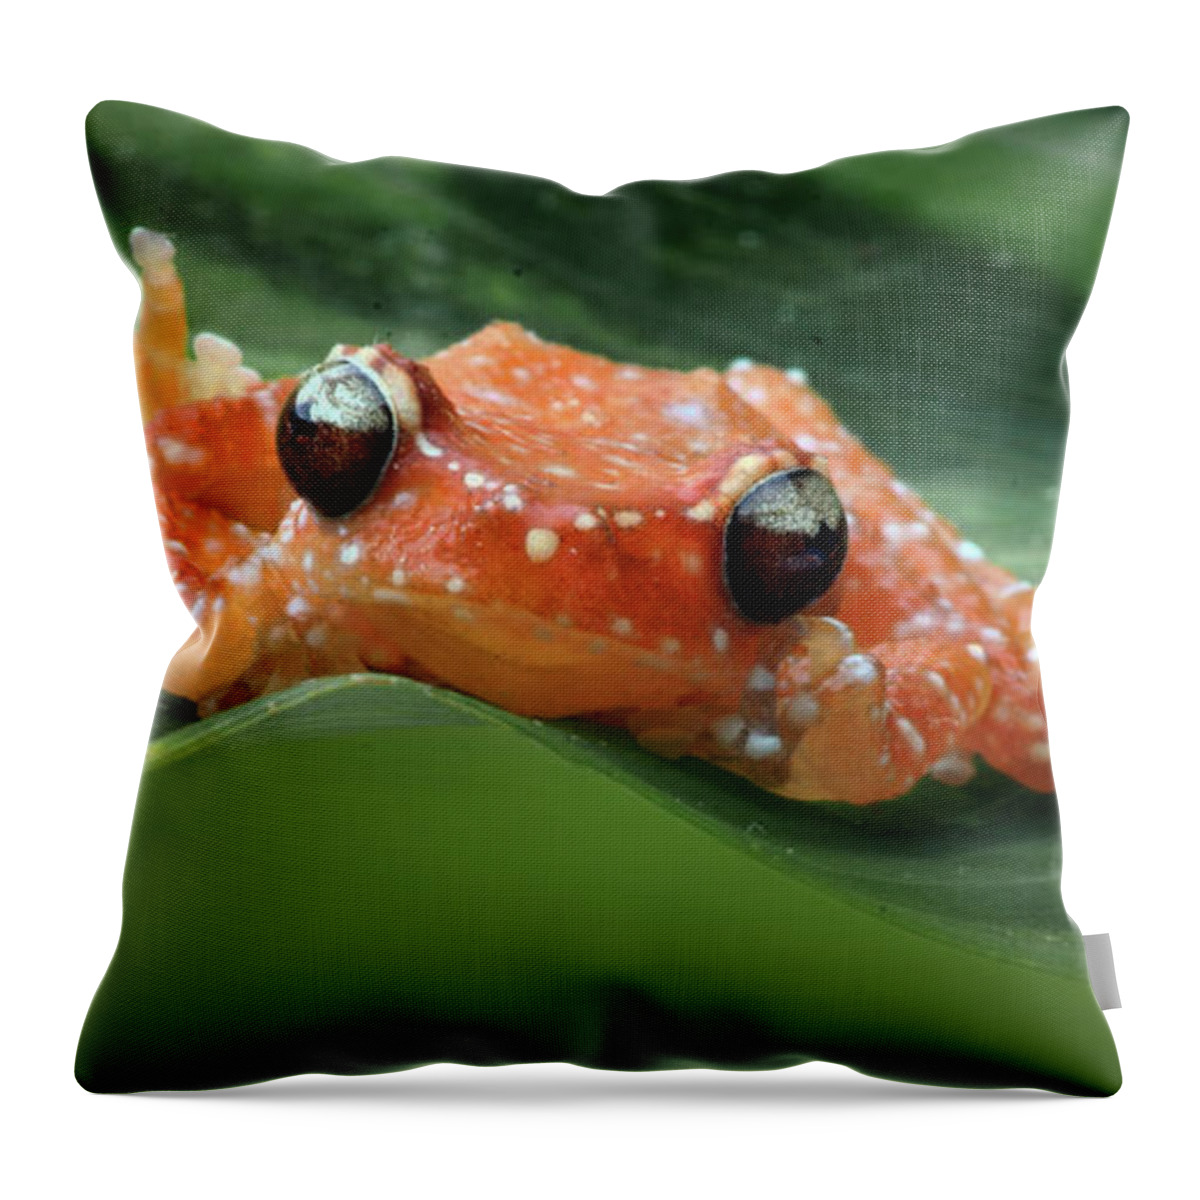 Frogs Throw Pillow featuring the photograph Cinnamon Frog by Nikolyn McDonald